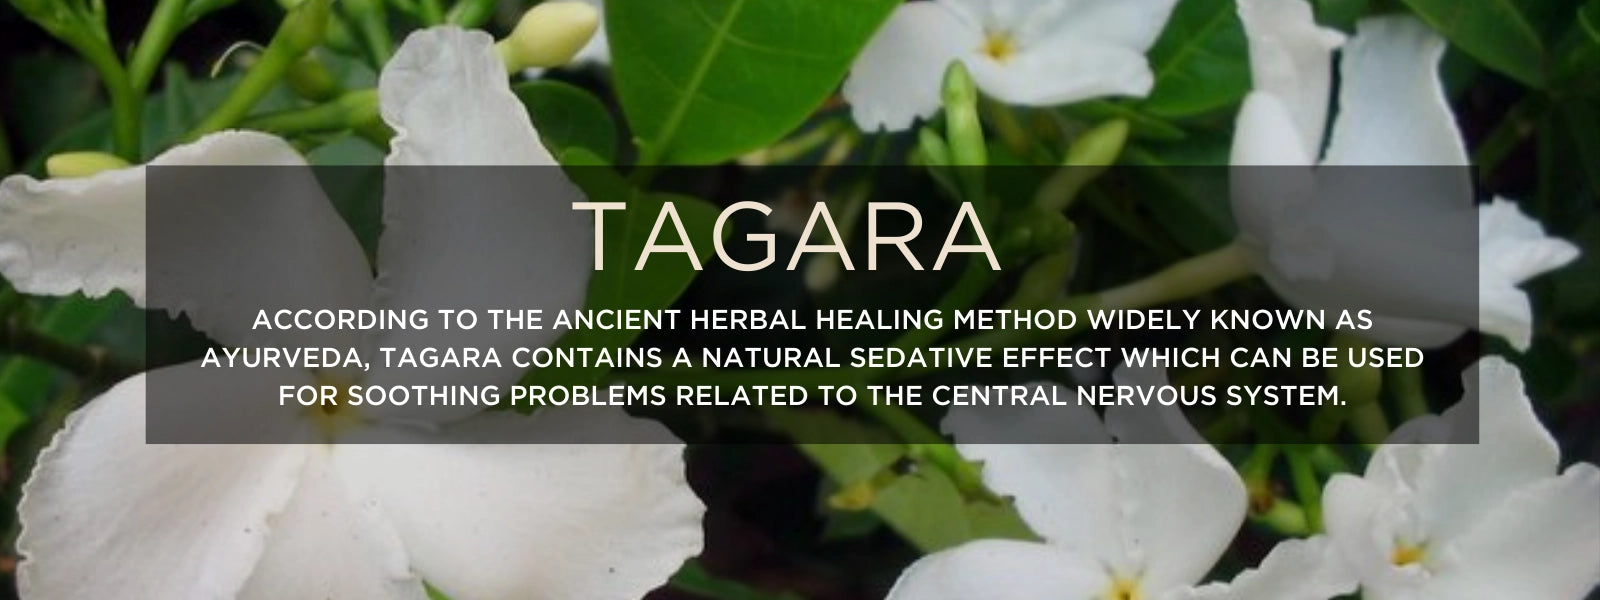 Tagar - Health Benefits, Uses and Important Facts